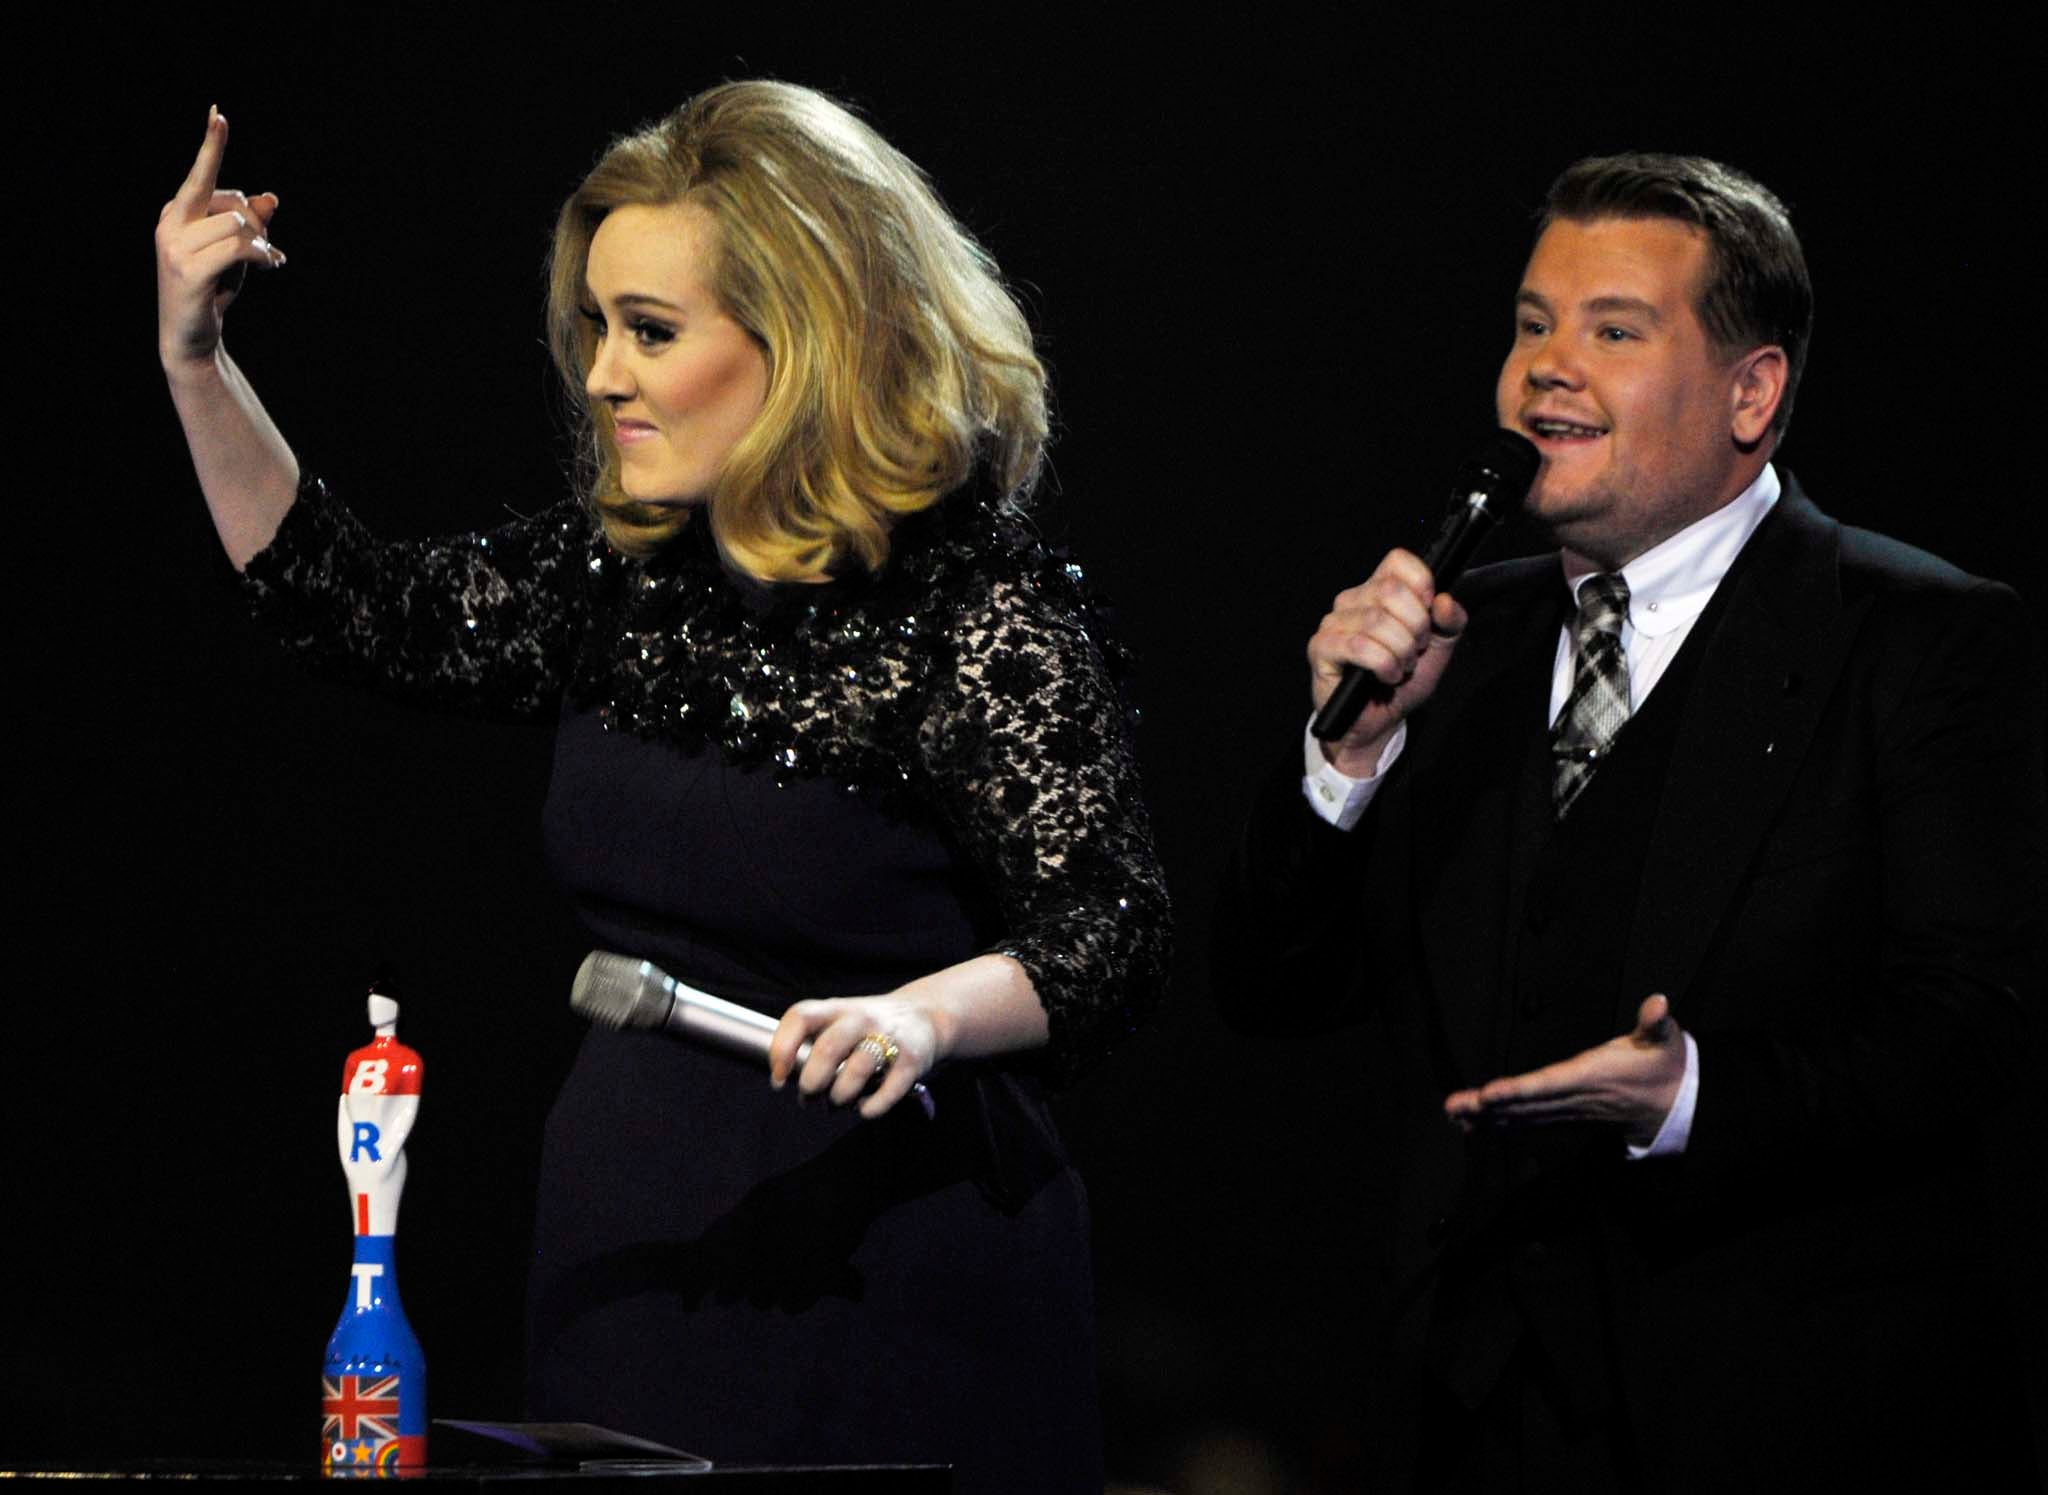 Adele, 2012 Adele gave the finger after James Corden cut short her acceptance speech for British Album of the Year. Corden was under pressure from television producers worried about the show overrunning, who later apologised to the singer. Adele